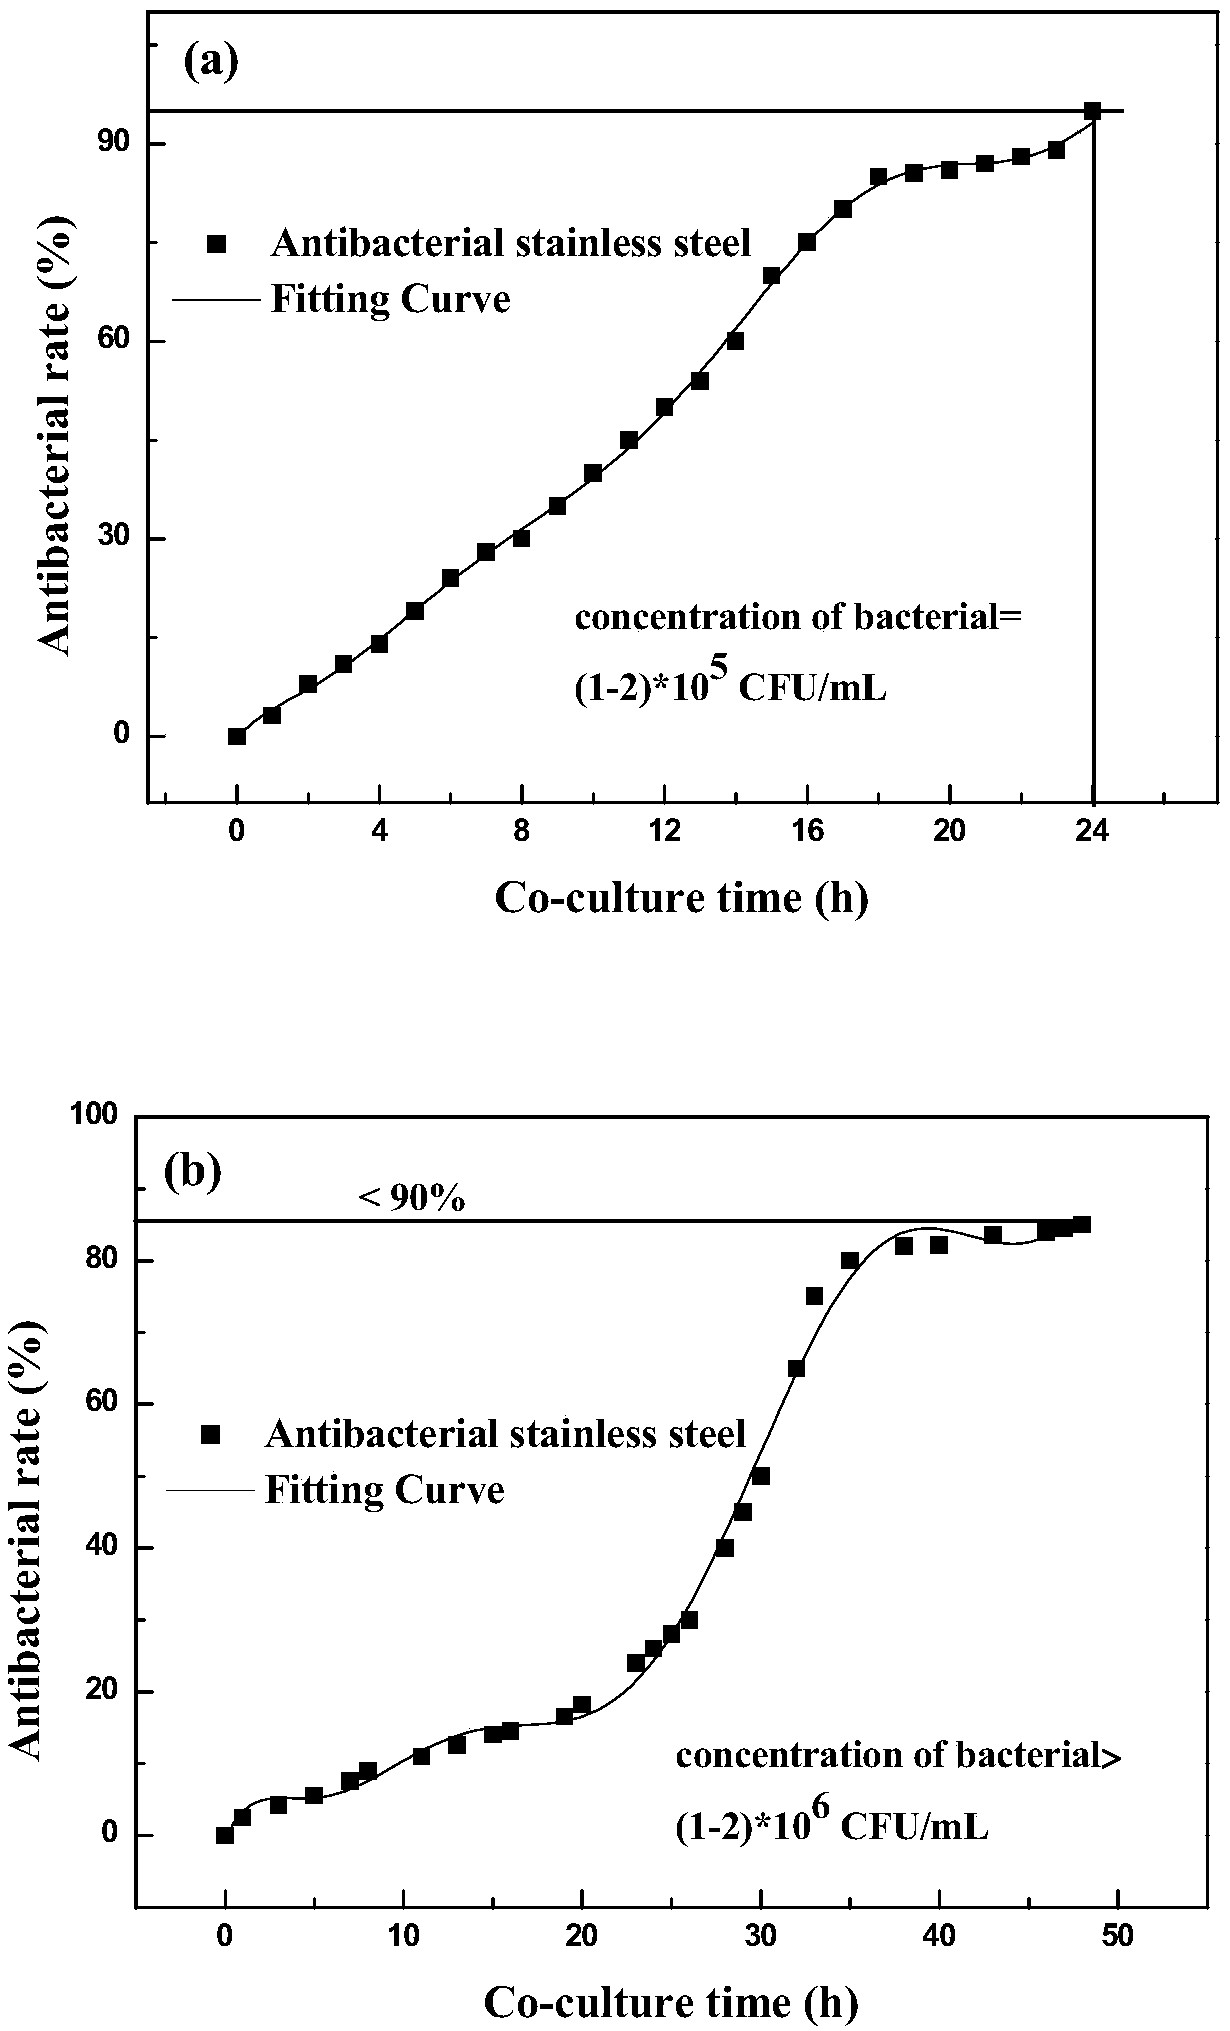 Ultrahigh-antibacterial-performance titanium alloy applied to medical implant and manufacturing method of ultrahigh-antibacterial-performance titanium alloy